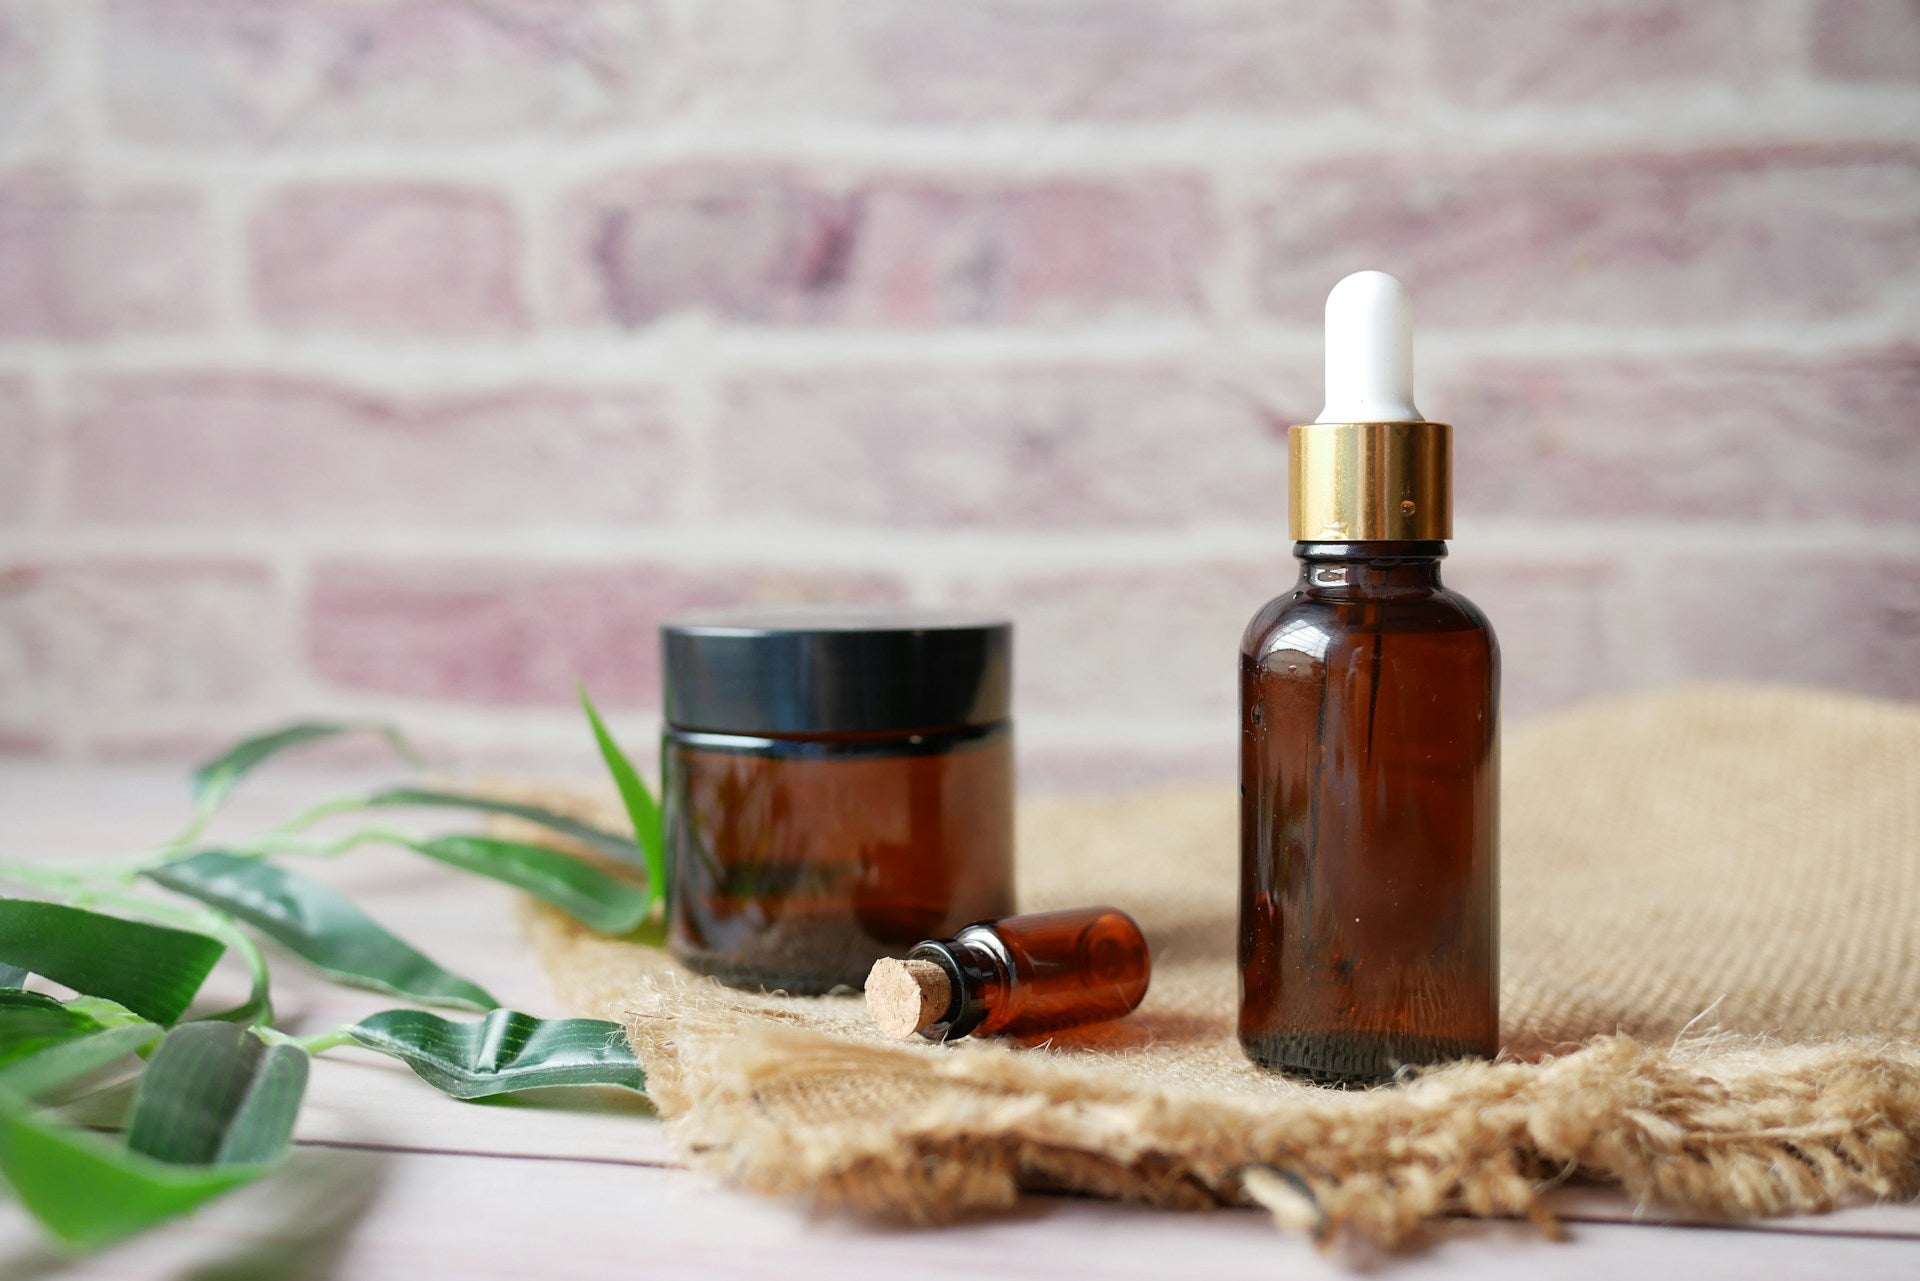 Alleviate Muscle Aches and Pains with MOXE's Natural Essential Oil Solutions